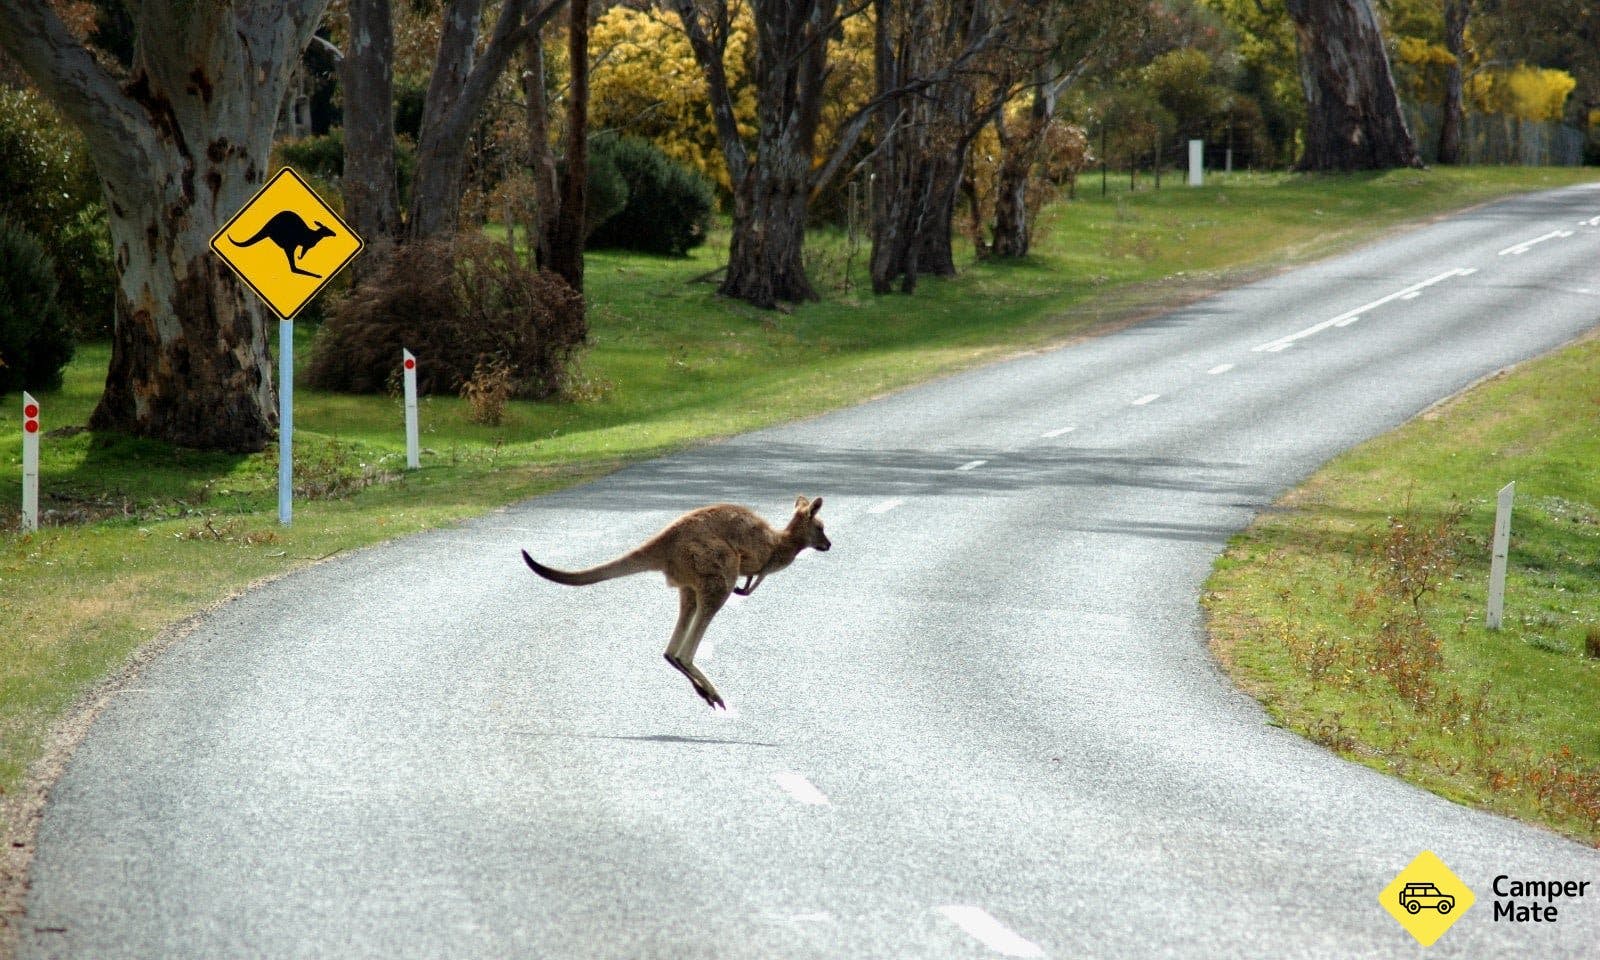 What to Do if You Hit a Roo